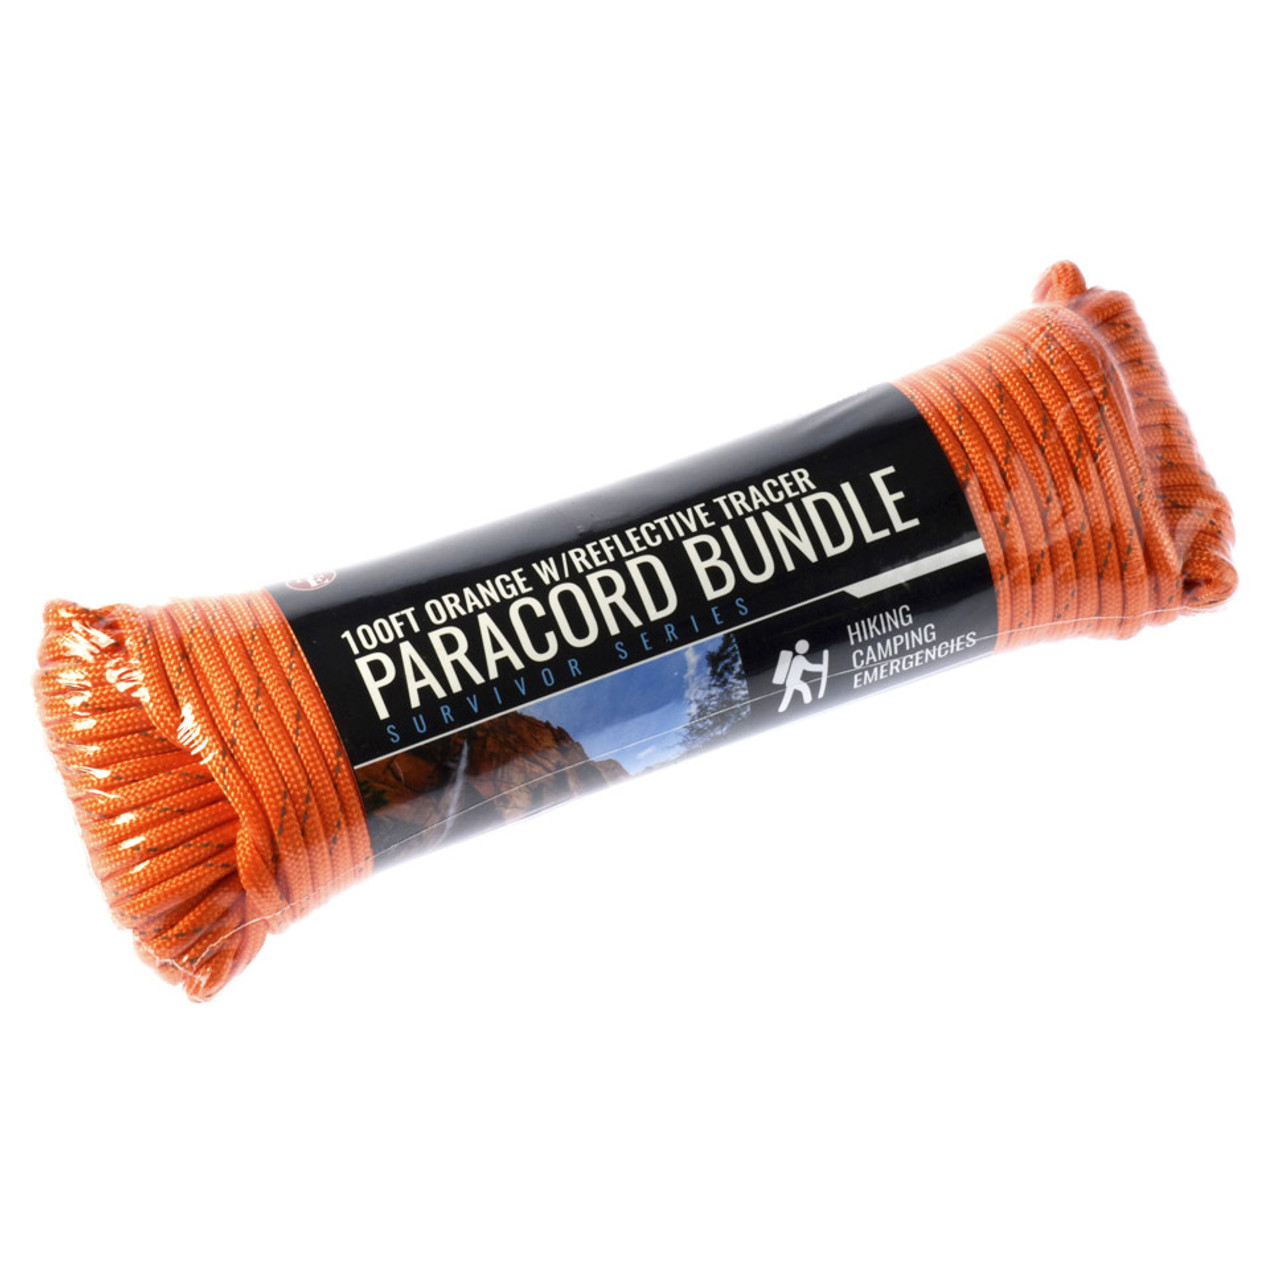 100 Ft. Bundle Orange Paracord with Reflective Tracer - 5/32 Dia.